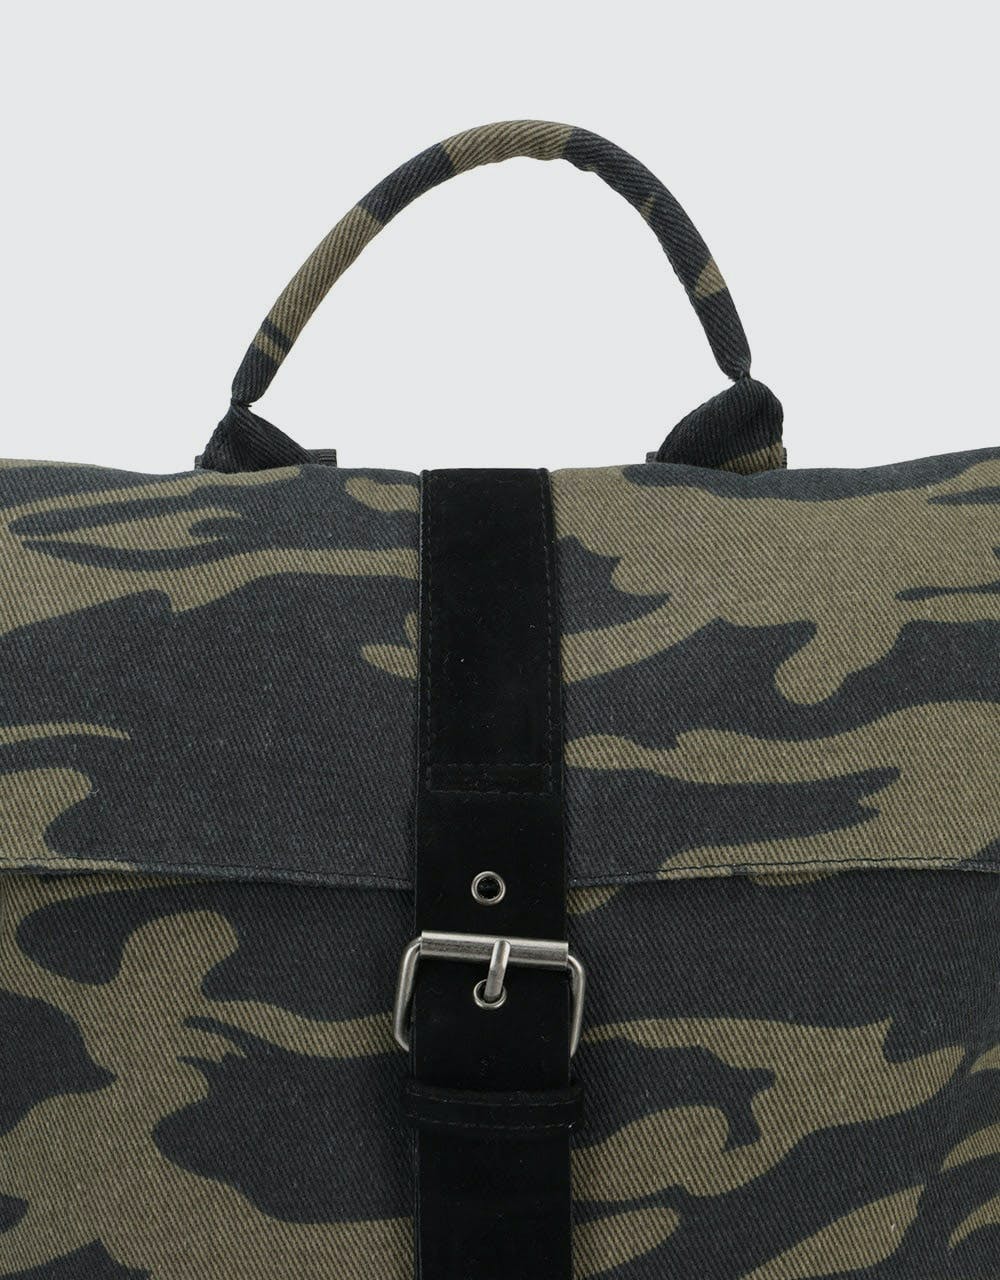 Mi-Pac Day Pack Canvas Camo Backpack - Khaki